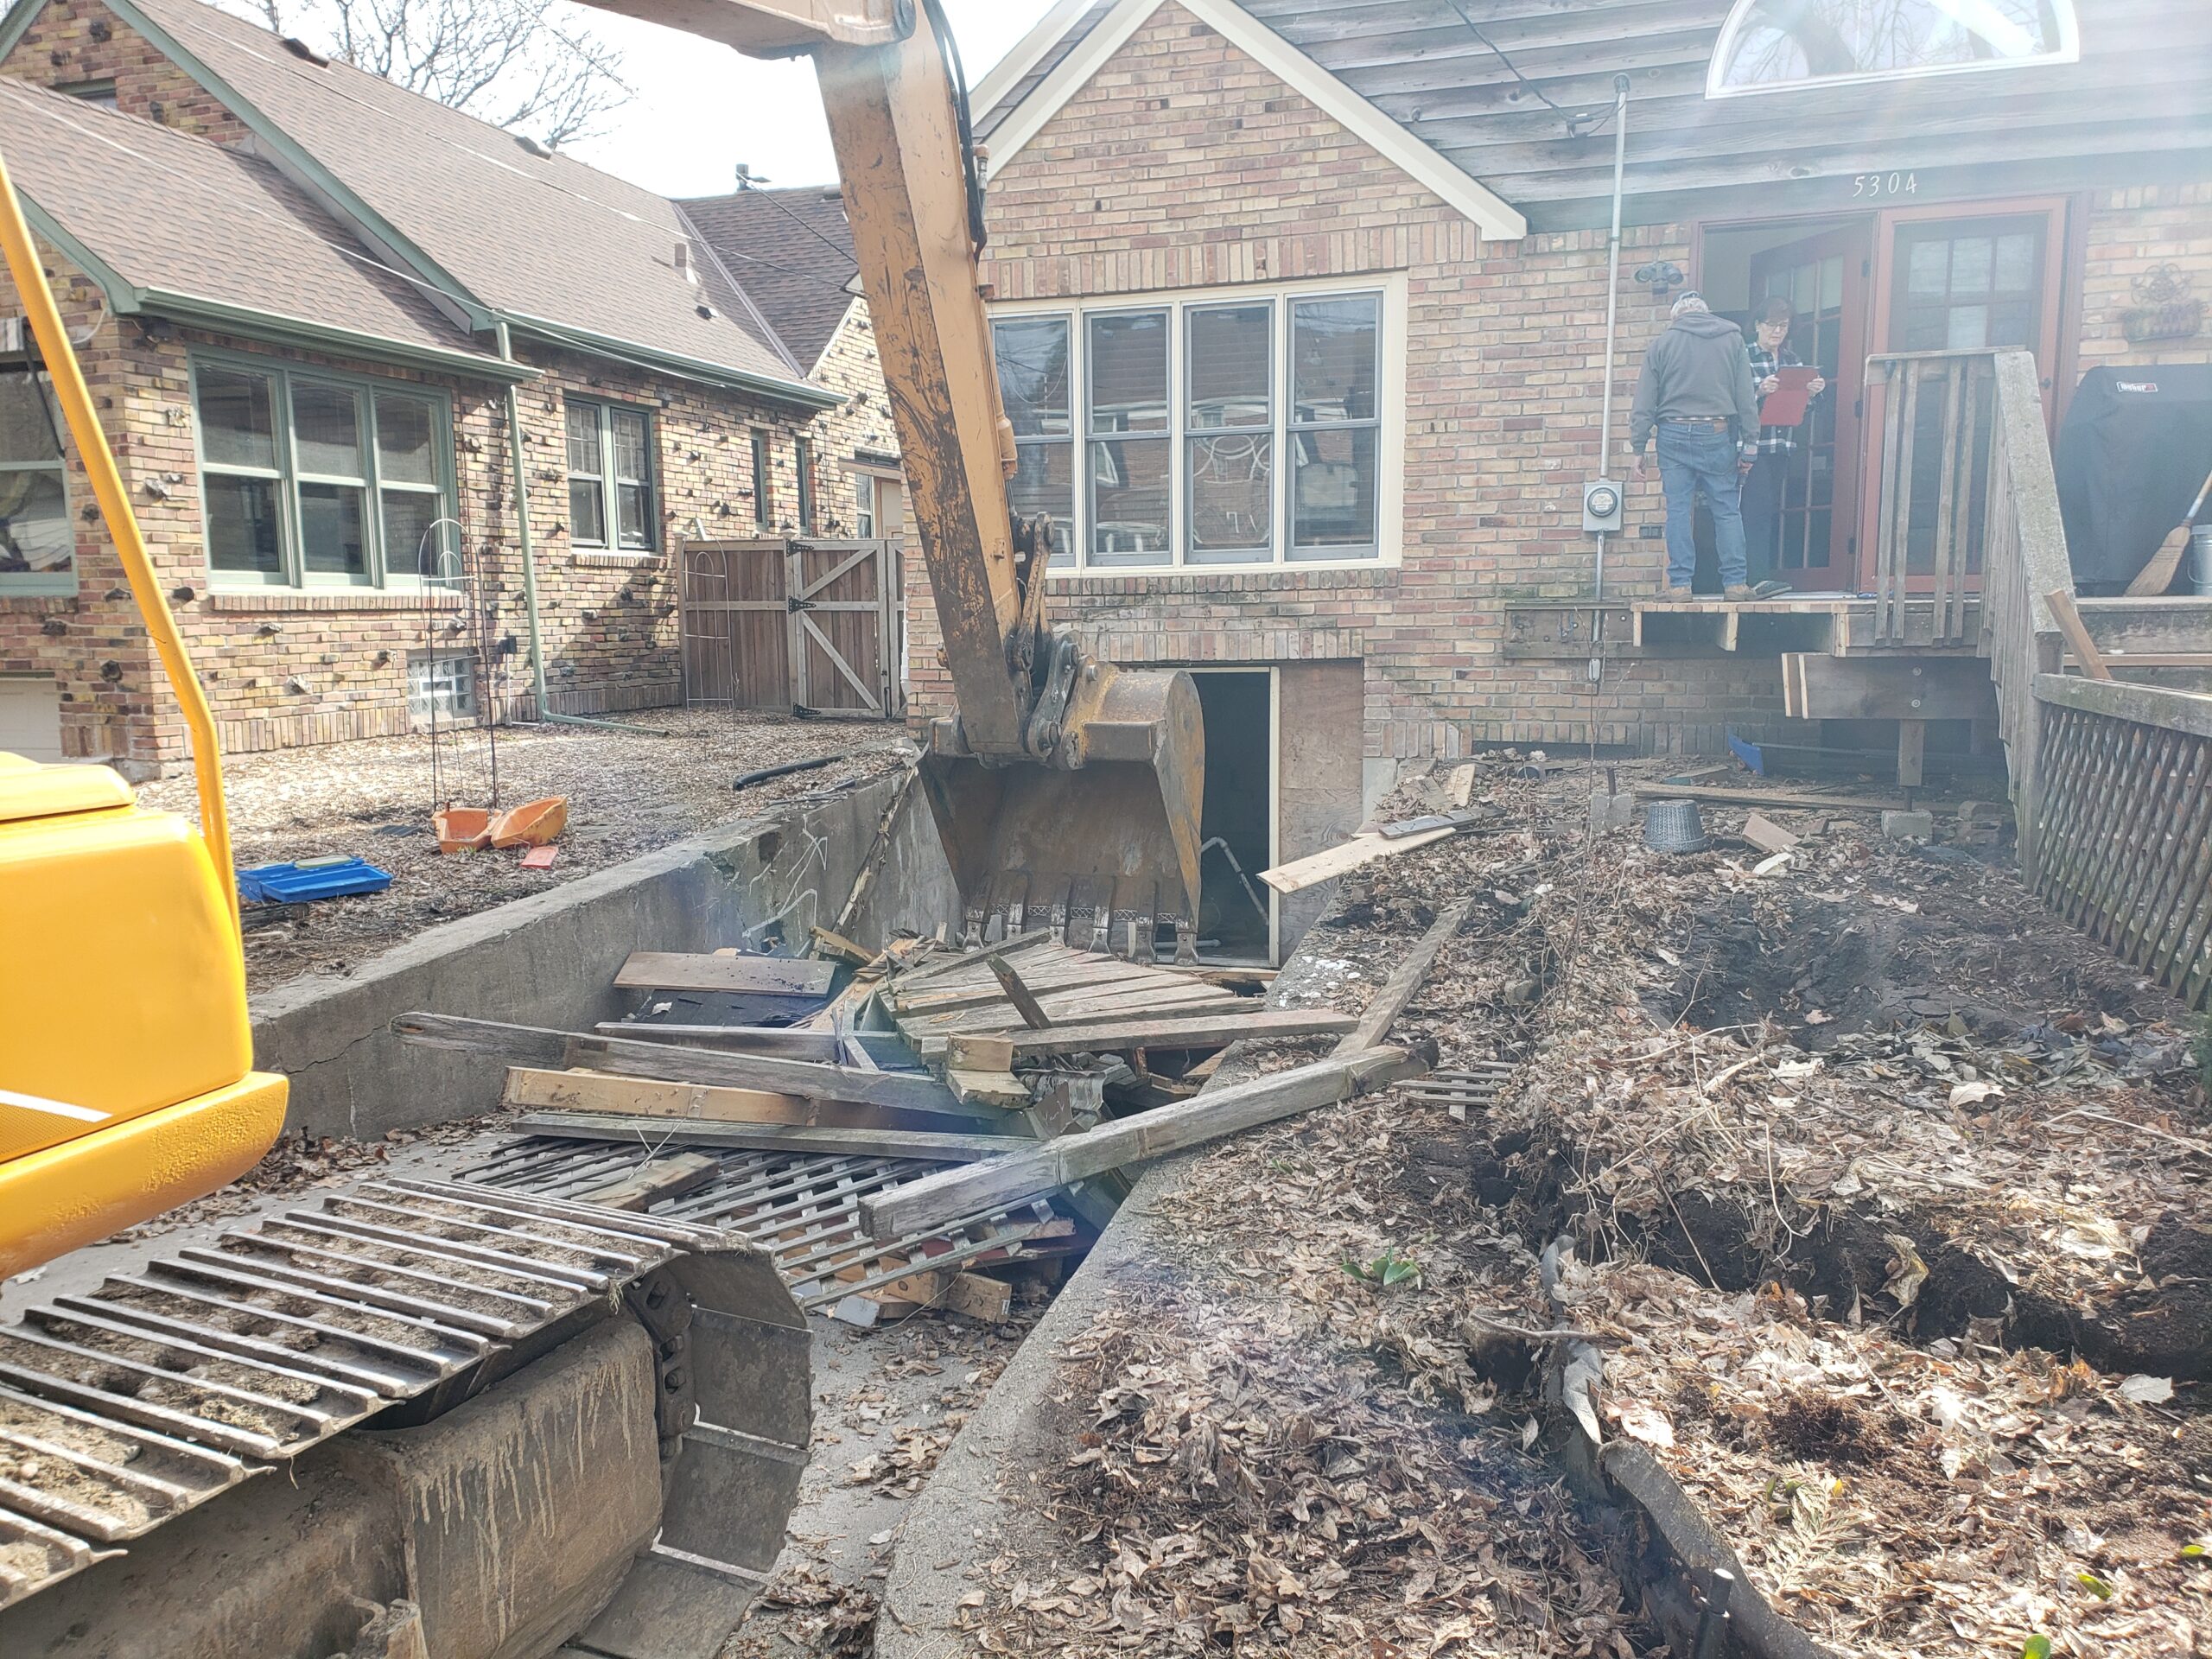 General Demolition services from Voehl Construction Inc. for teardown, destruction and other commercial and residential projects in the Twin Cities metro area.